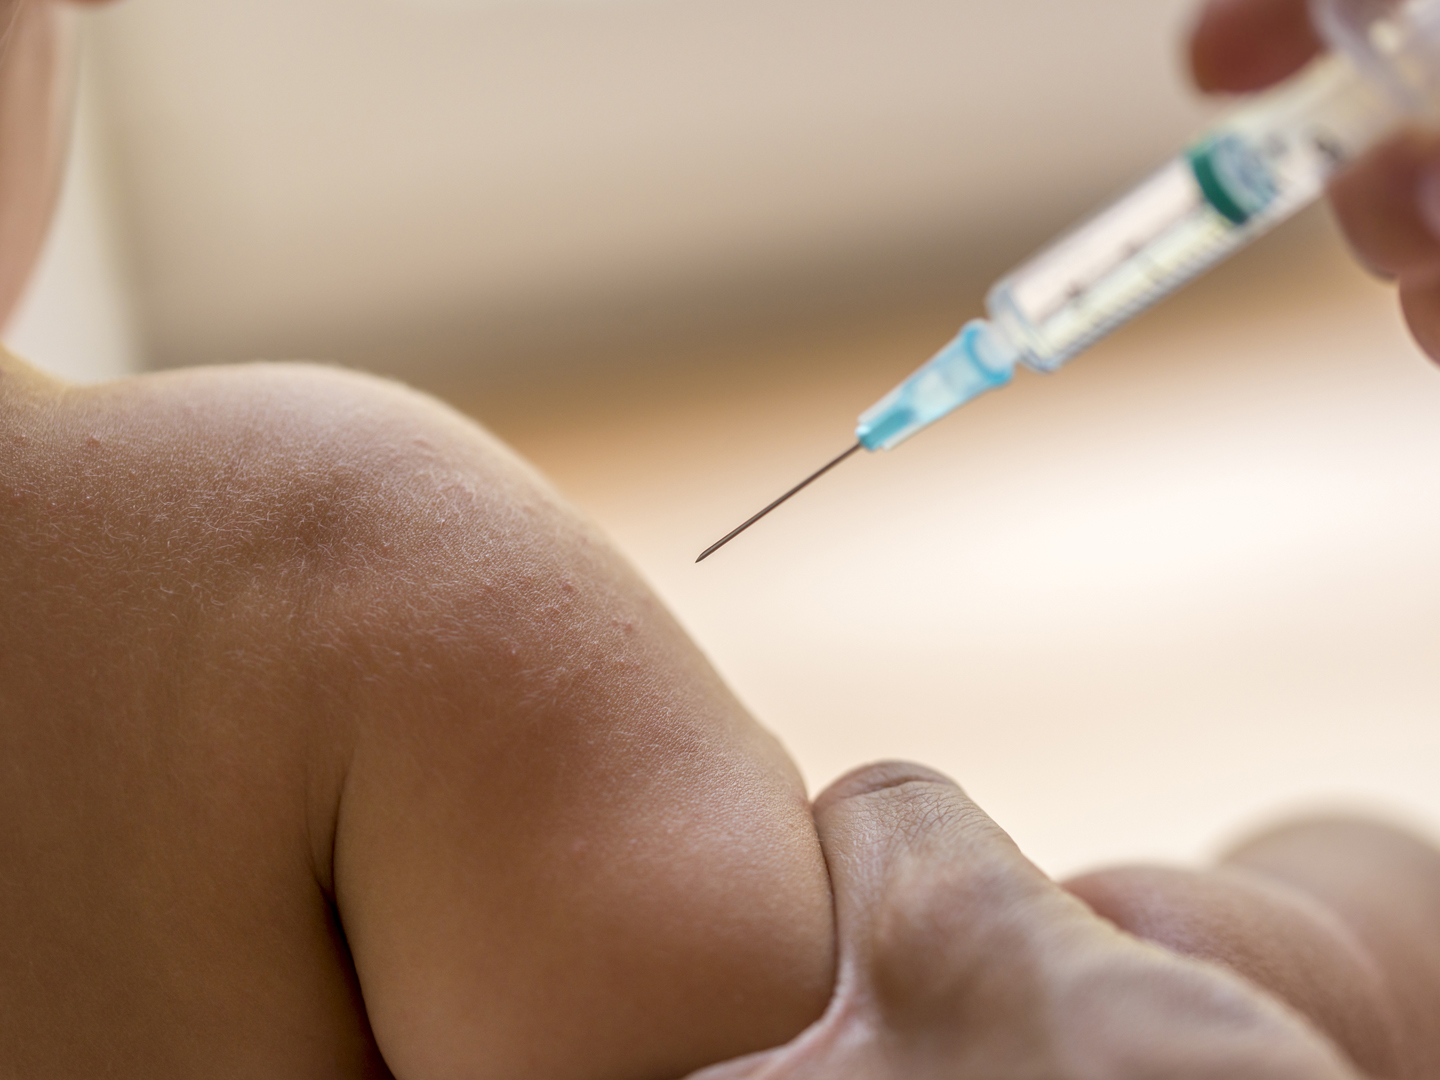 Doctor injecting a young child with a vaccination or antibiotic in a small disposable hypodermic syringe, close up of the kids arm and needle.